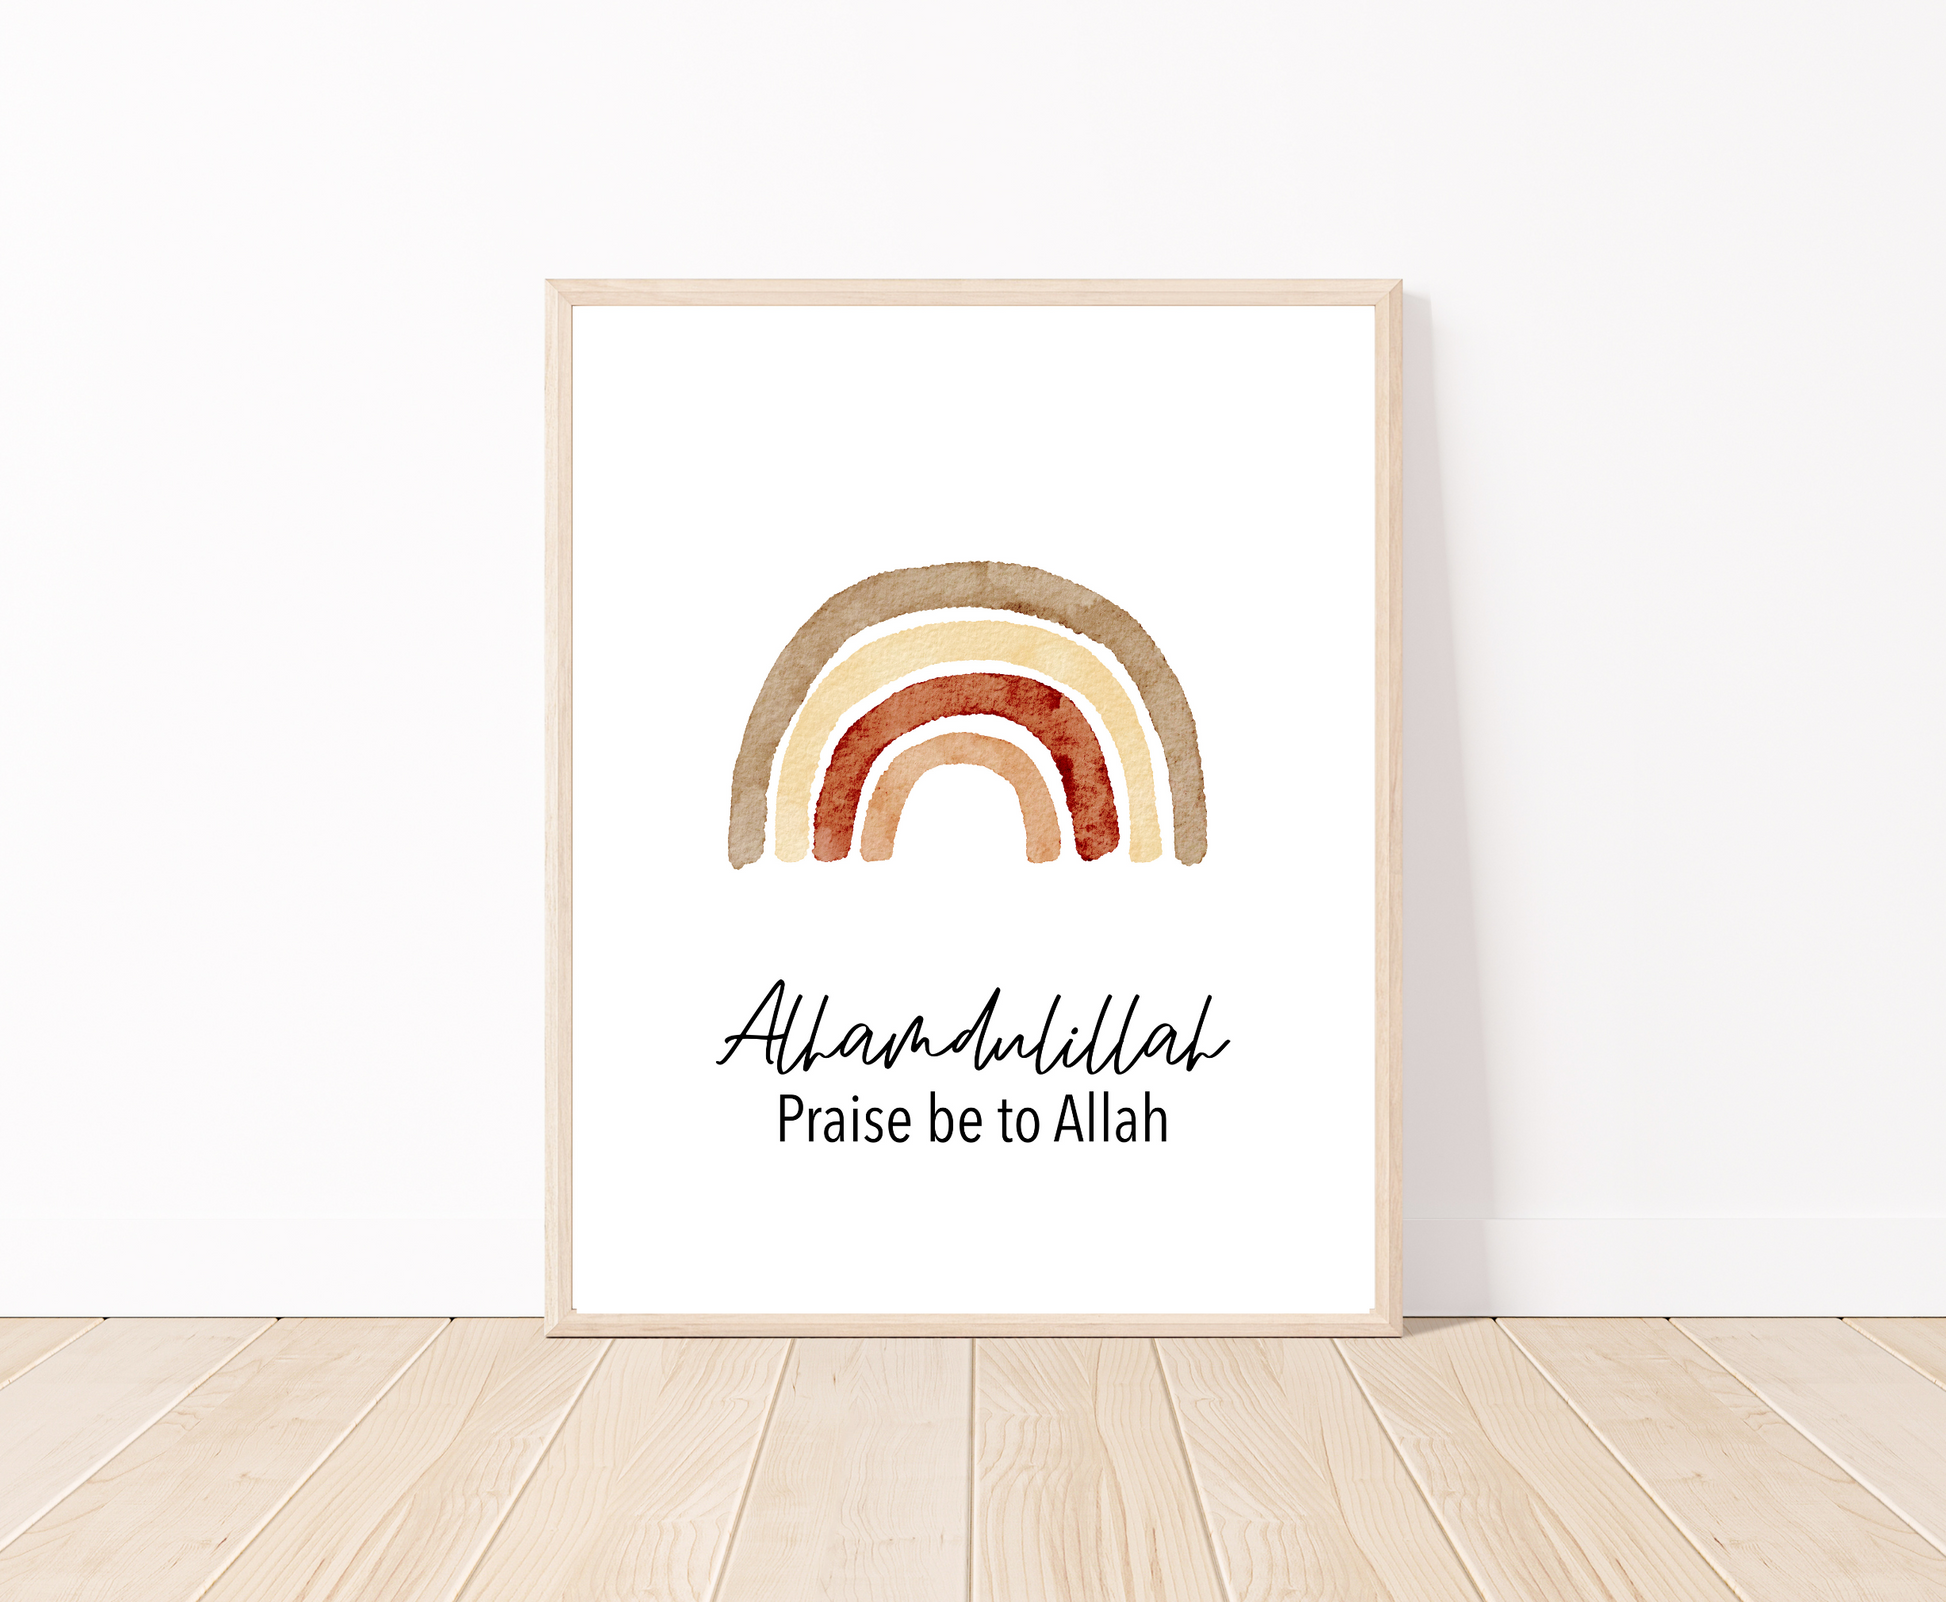 A digital poster that is placed on a white wall and parquet flooring shows a different degree brown rainbow design with the word “Alhamdulillah”, Praise Be to Allah below.